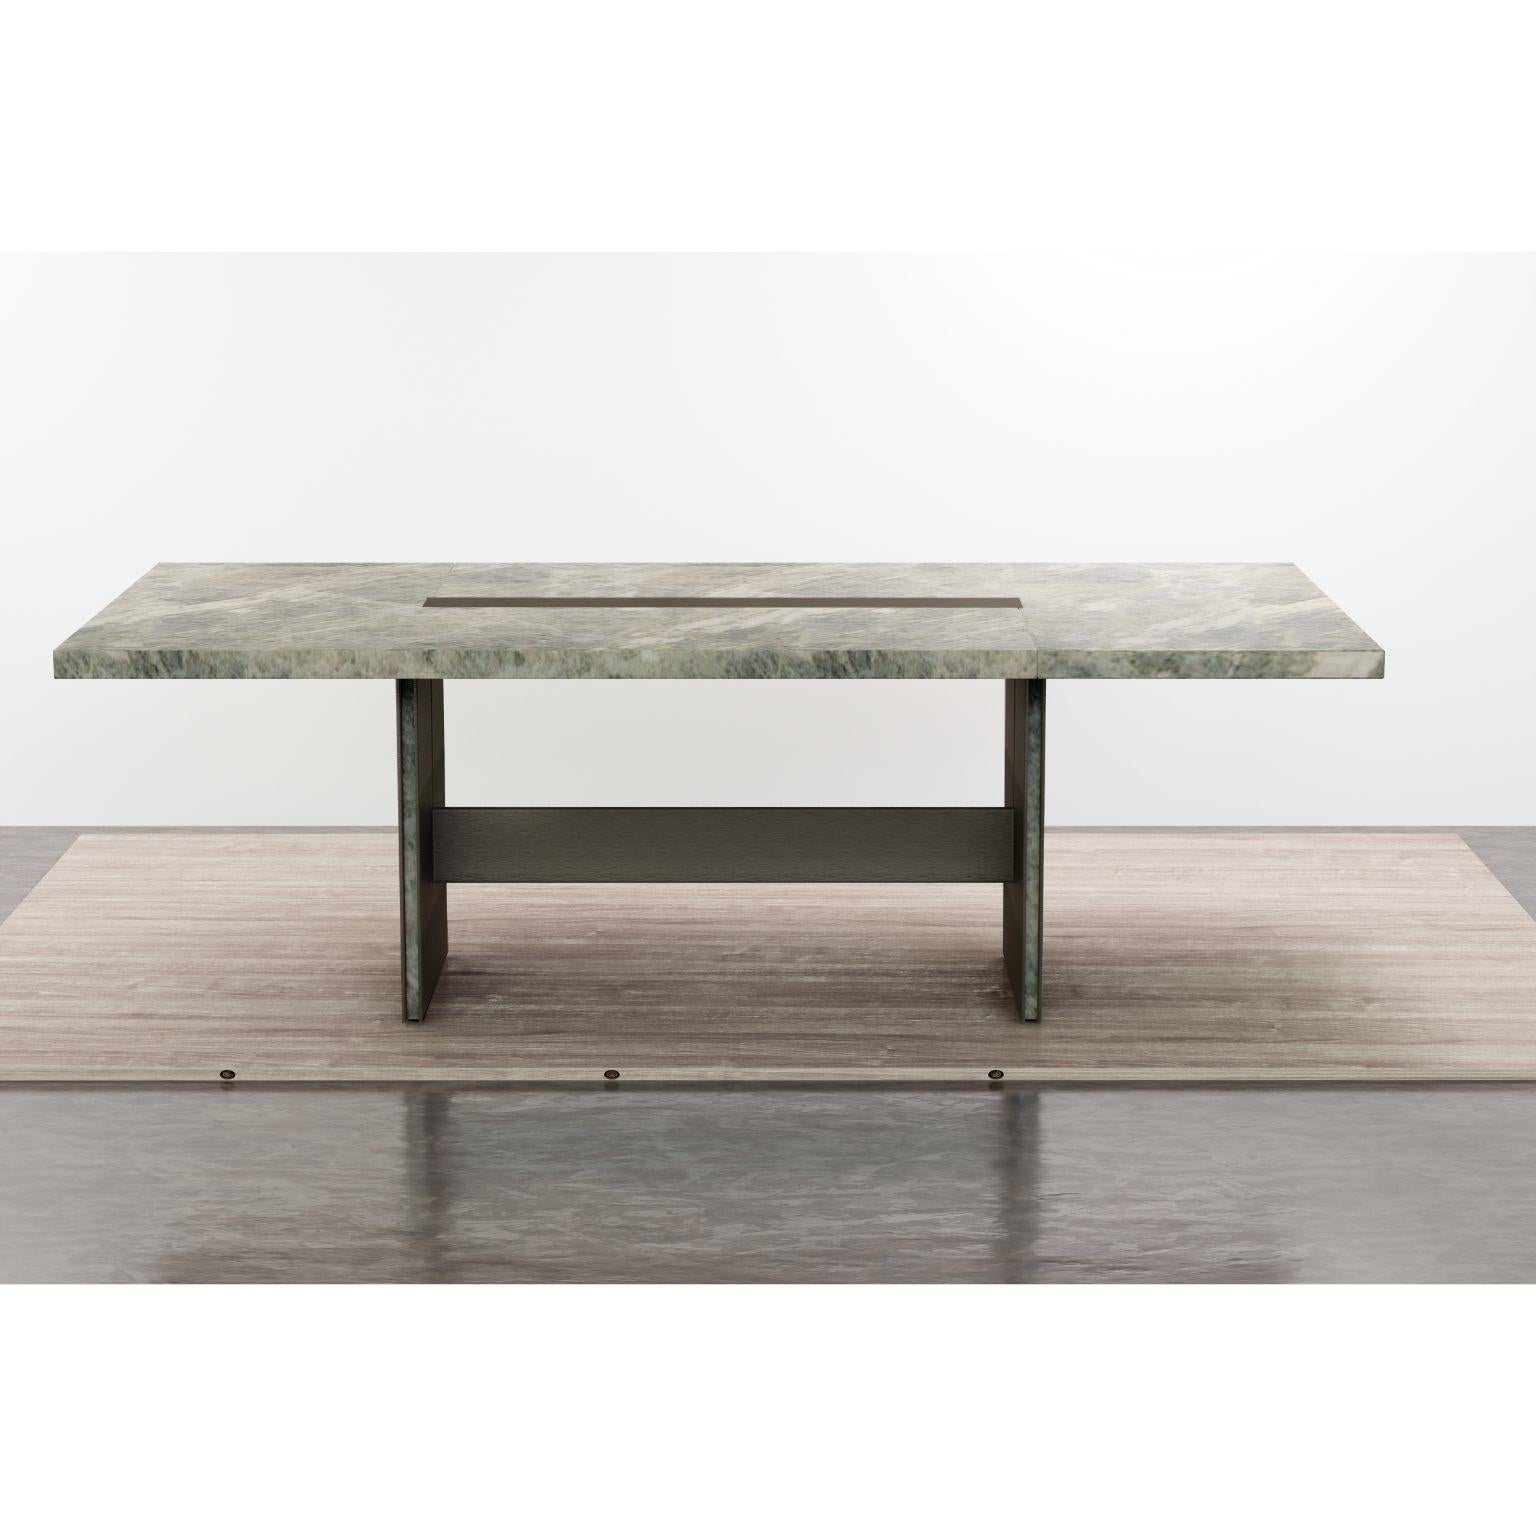 Amena dining table by Simon Hamui
Dimensions: D 330 x W 150 x H 73 cm 
Materials: stone, acrylic
Also available in different dimensions. 

Dining table designed to seat up to 20 people. The table top is made of stone
with a linear cutout down